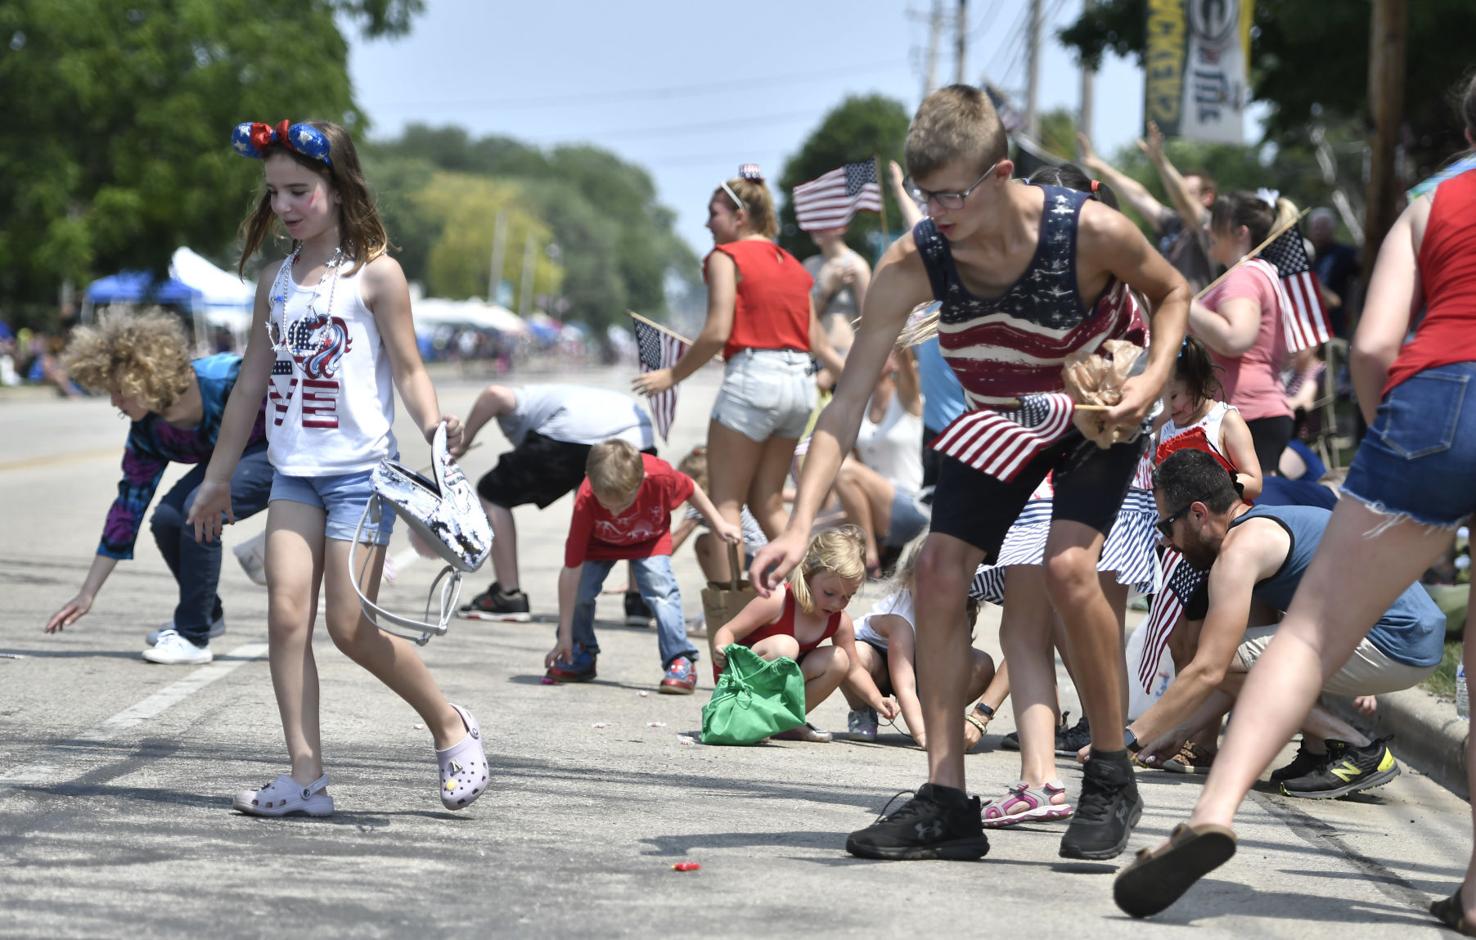 Somers plans for Fourth of July parade coming together Local News